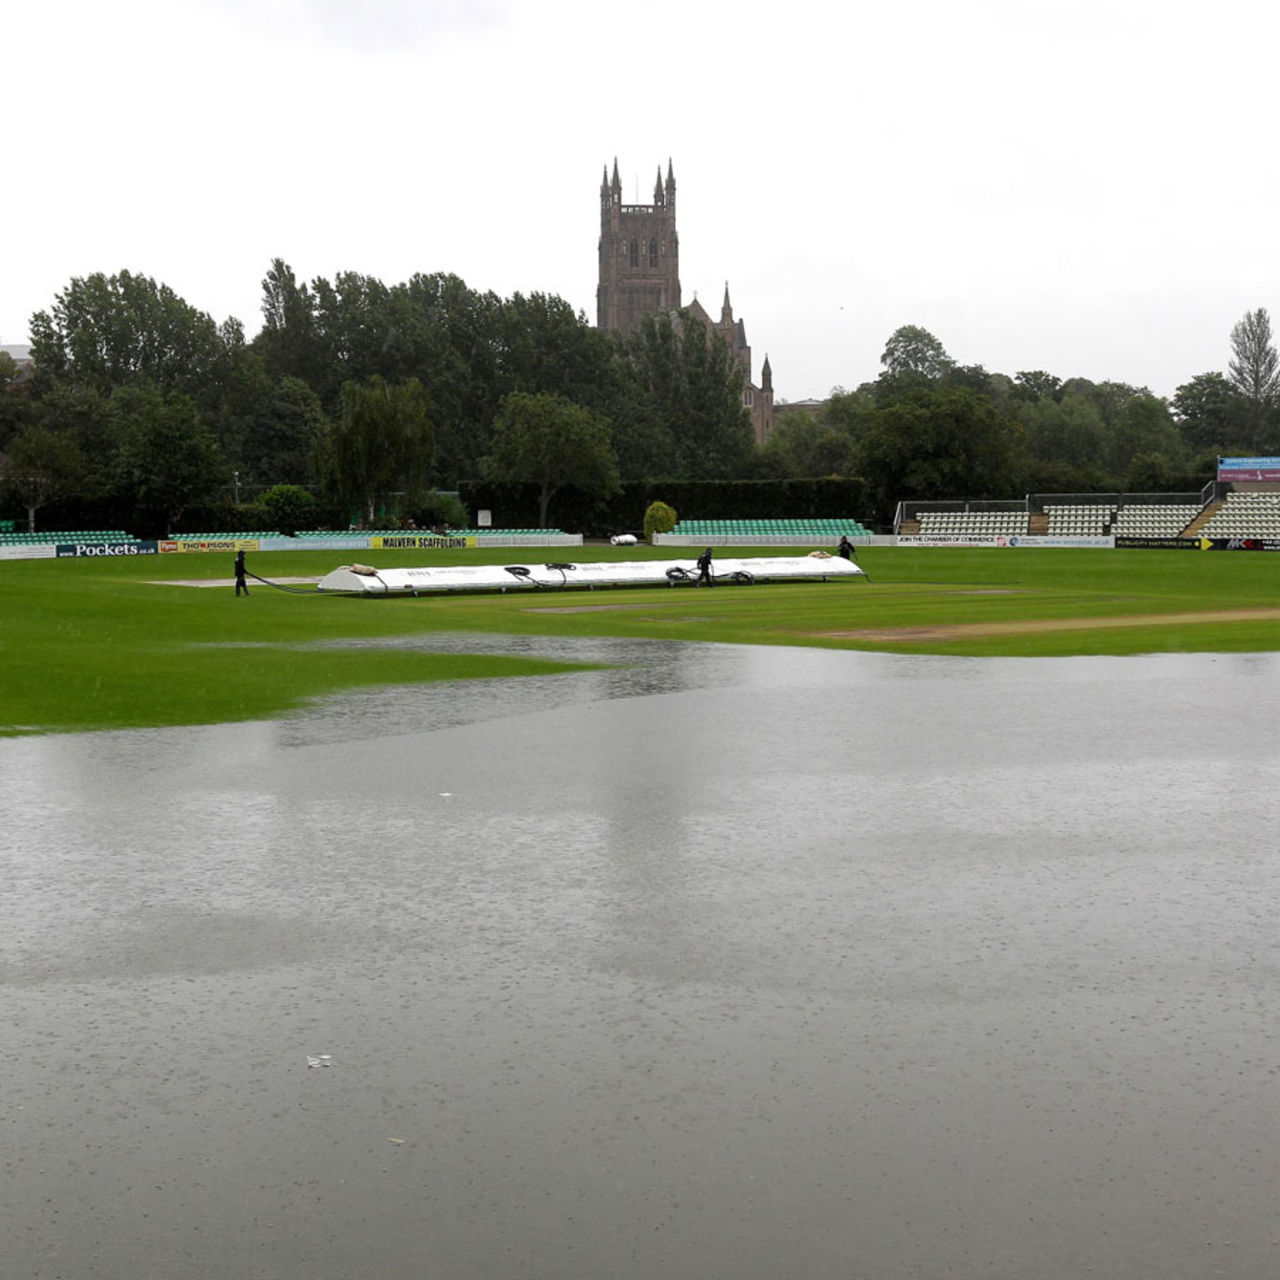 Rain falling on Worcestershire's flooded outfield, New Road, July 16, 2012